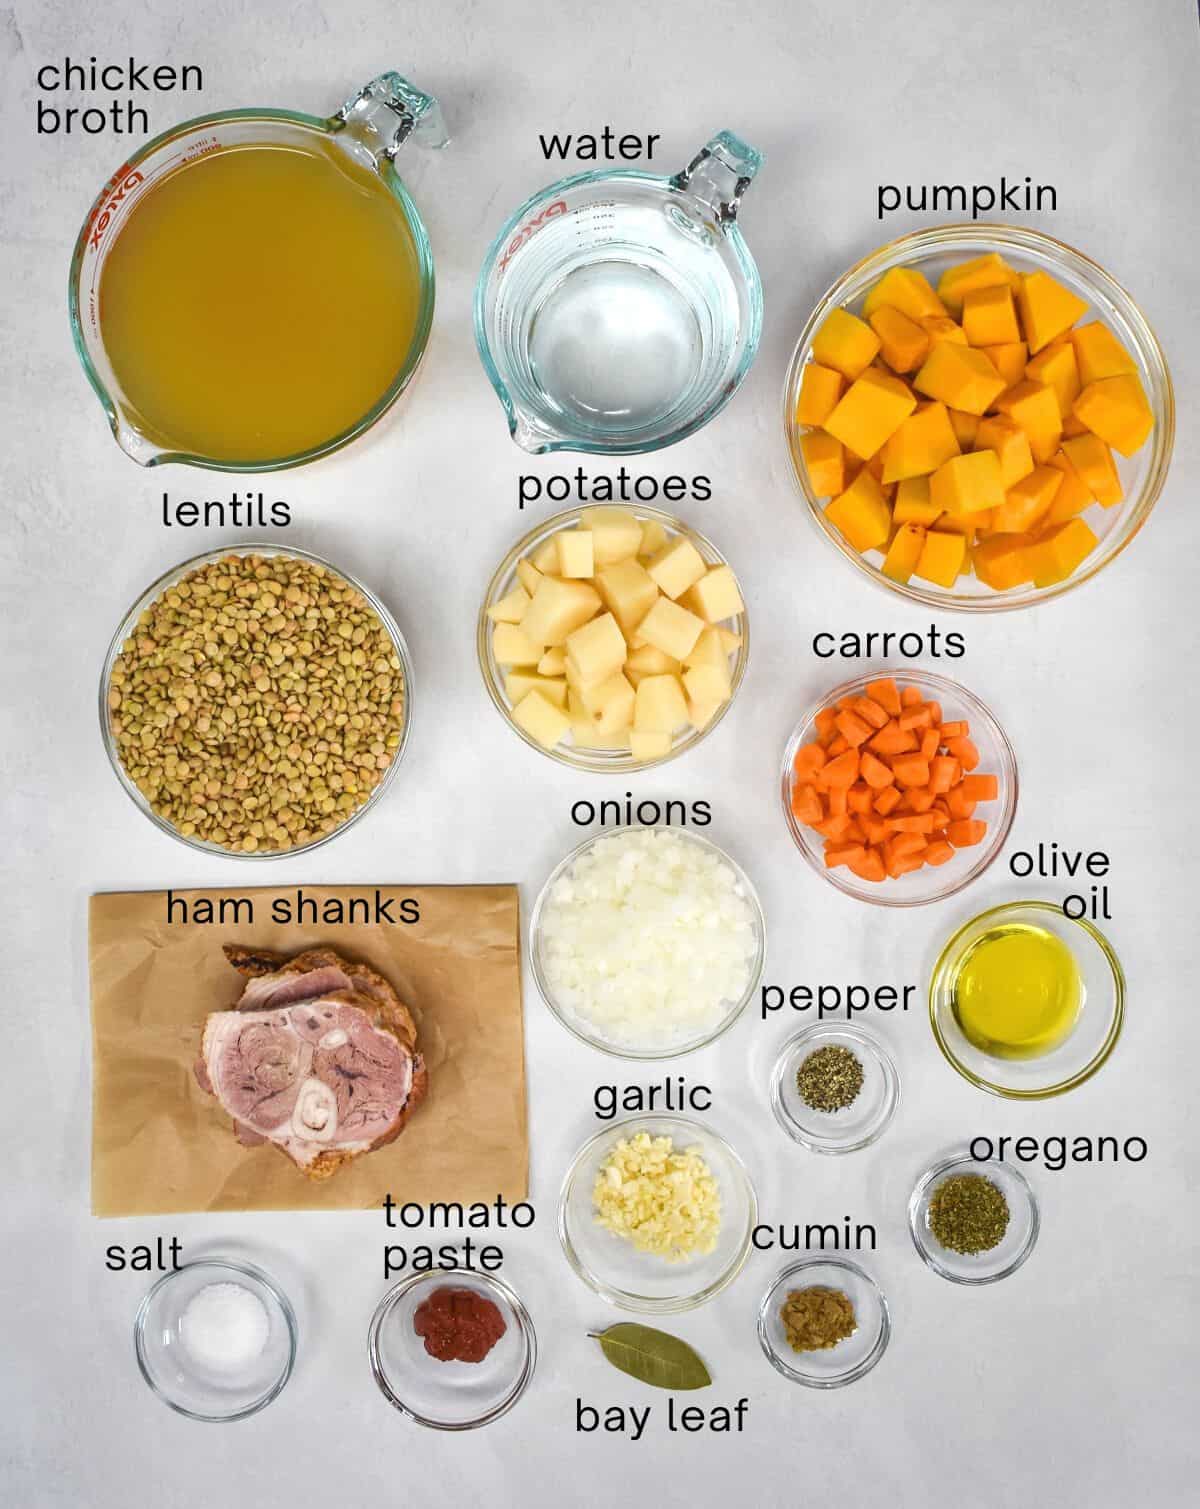 The ingredients for the soup arranged on a white table, each has small text with the name.